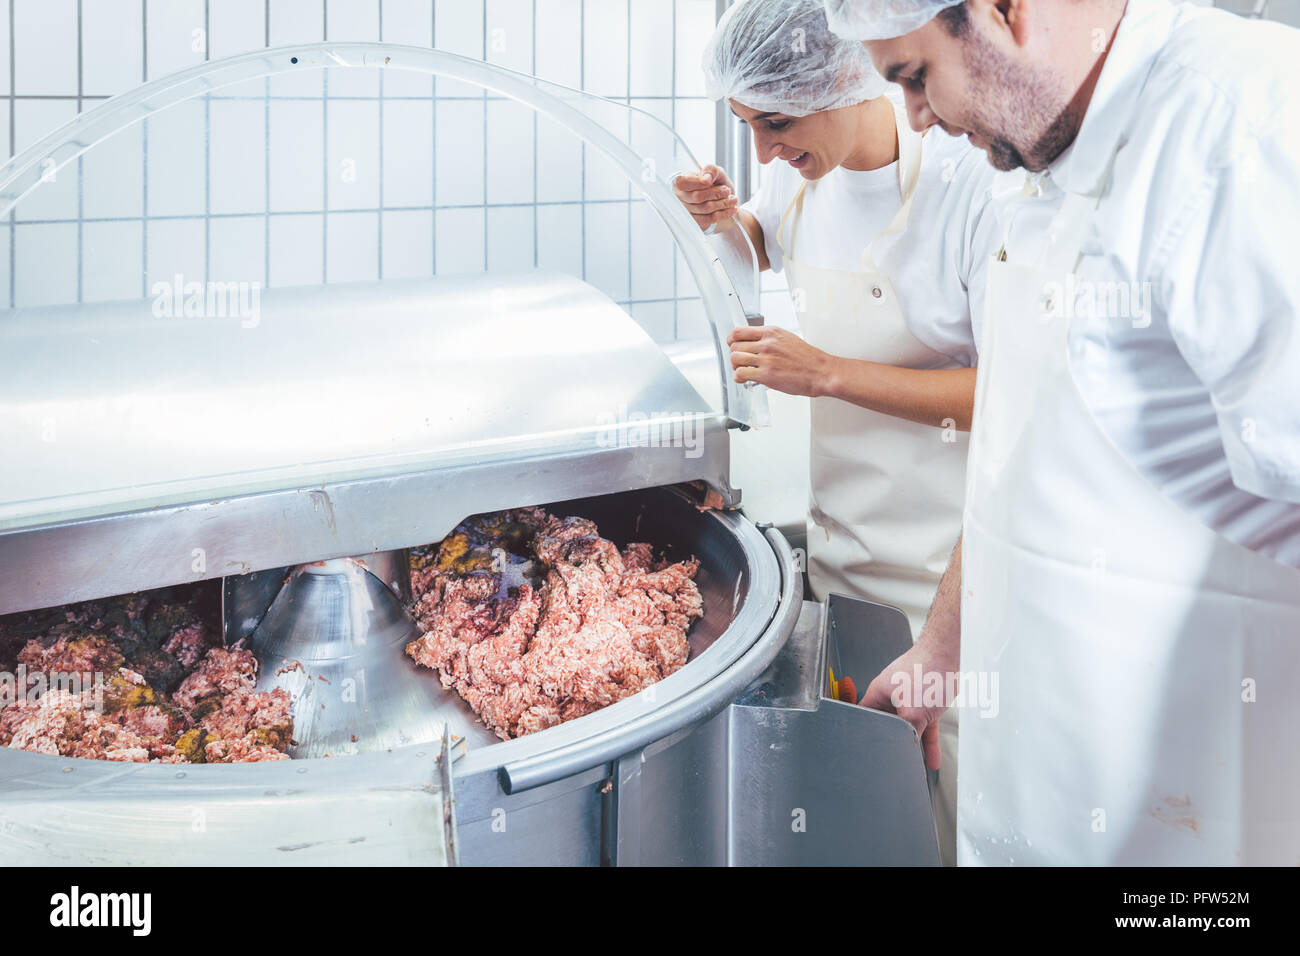 Butchers in butchery processing meat Stock Photo